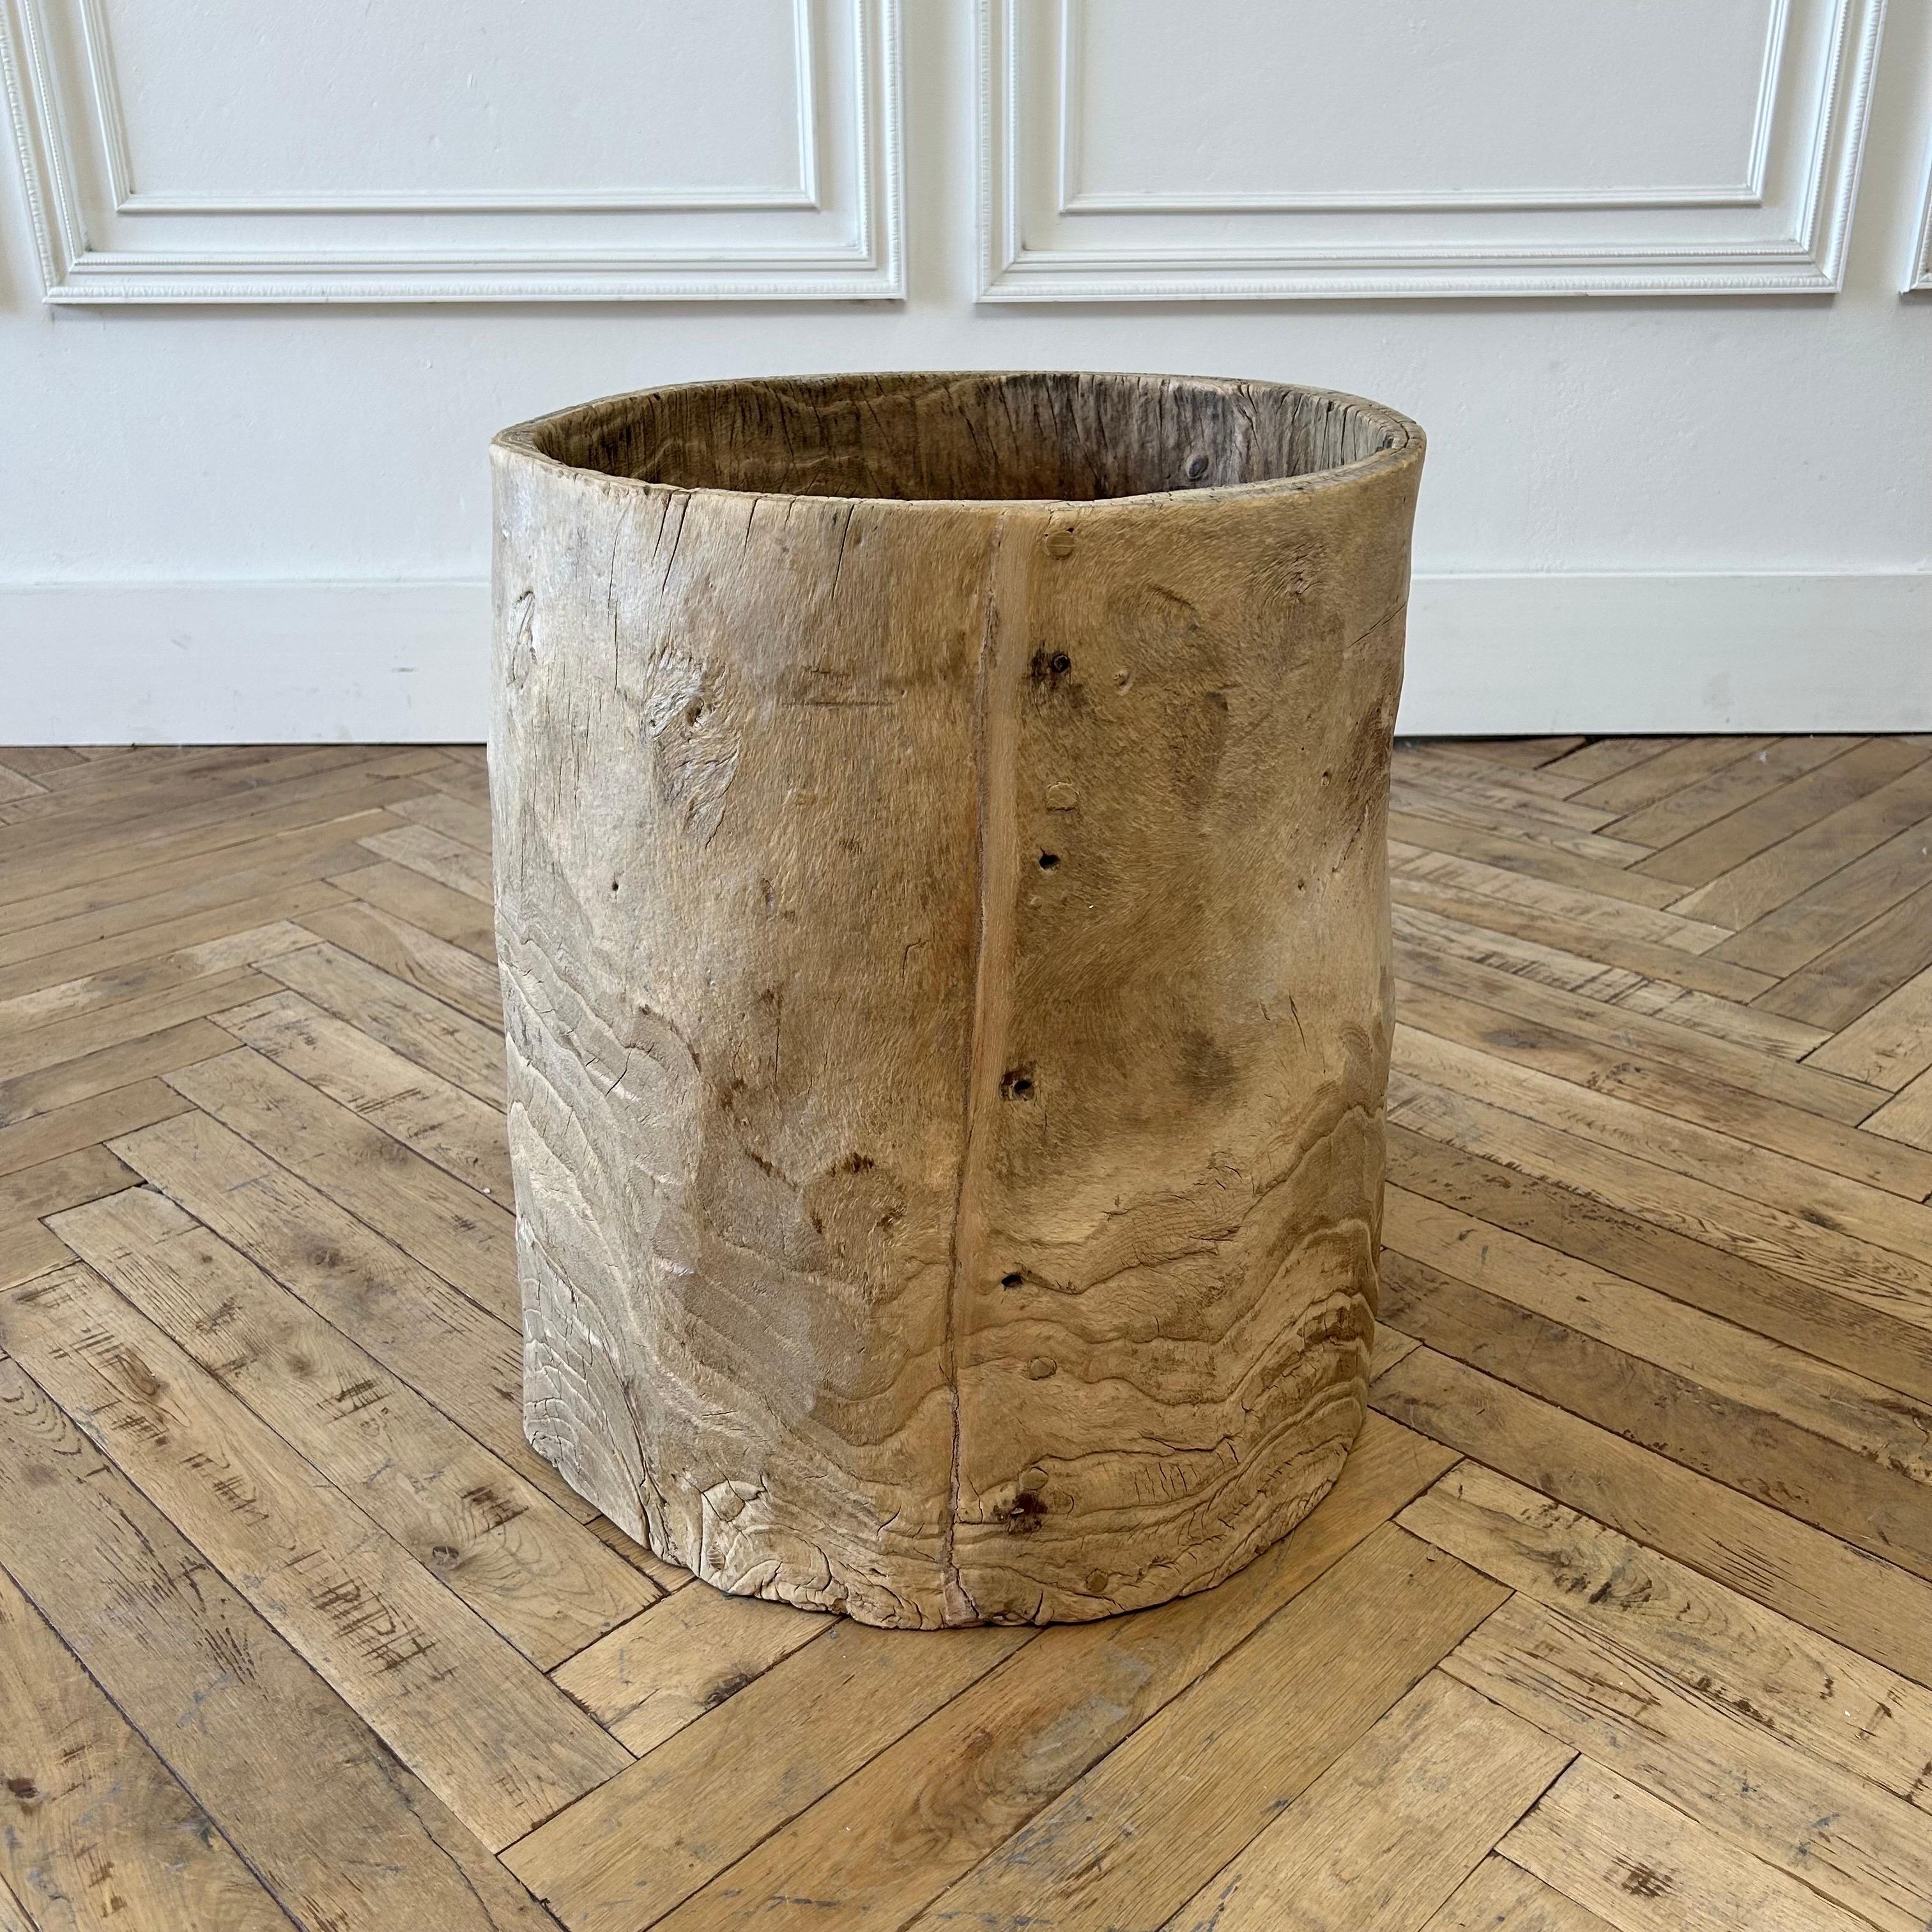 20th Century Large Carved Out Stump Decorative Planter